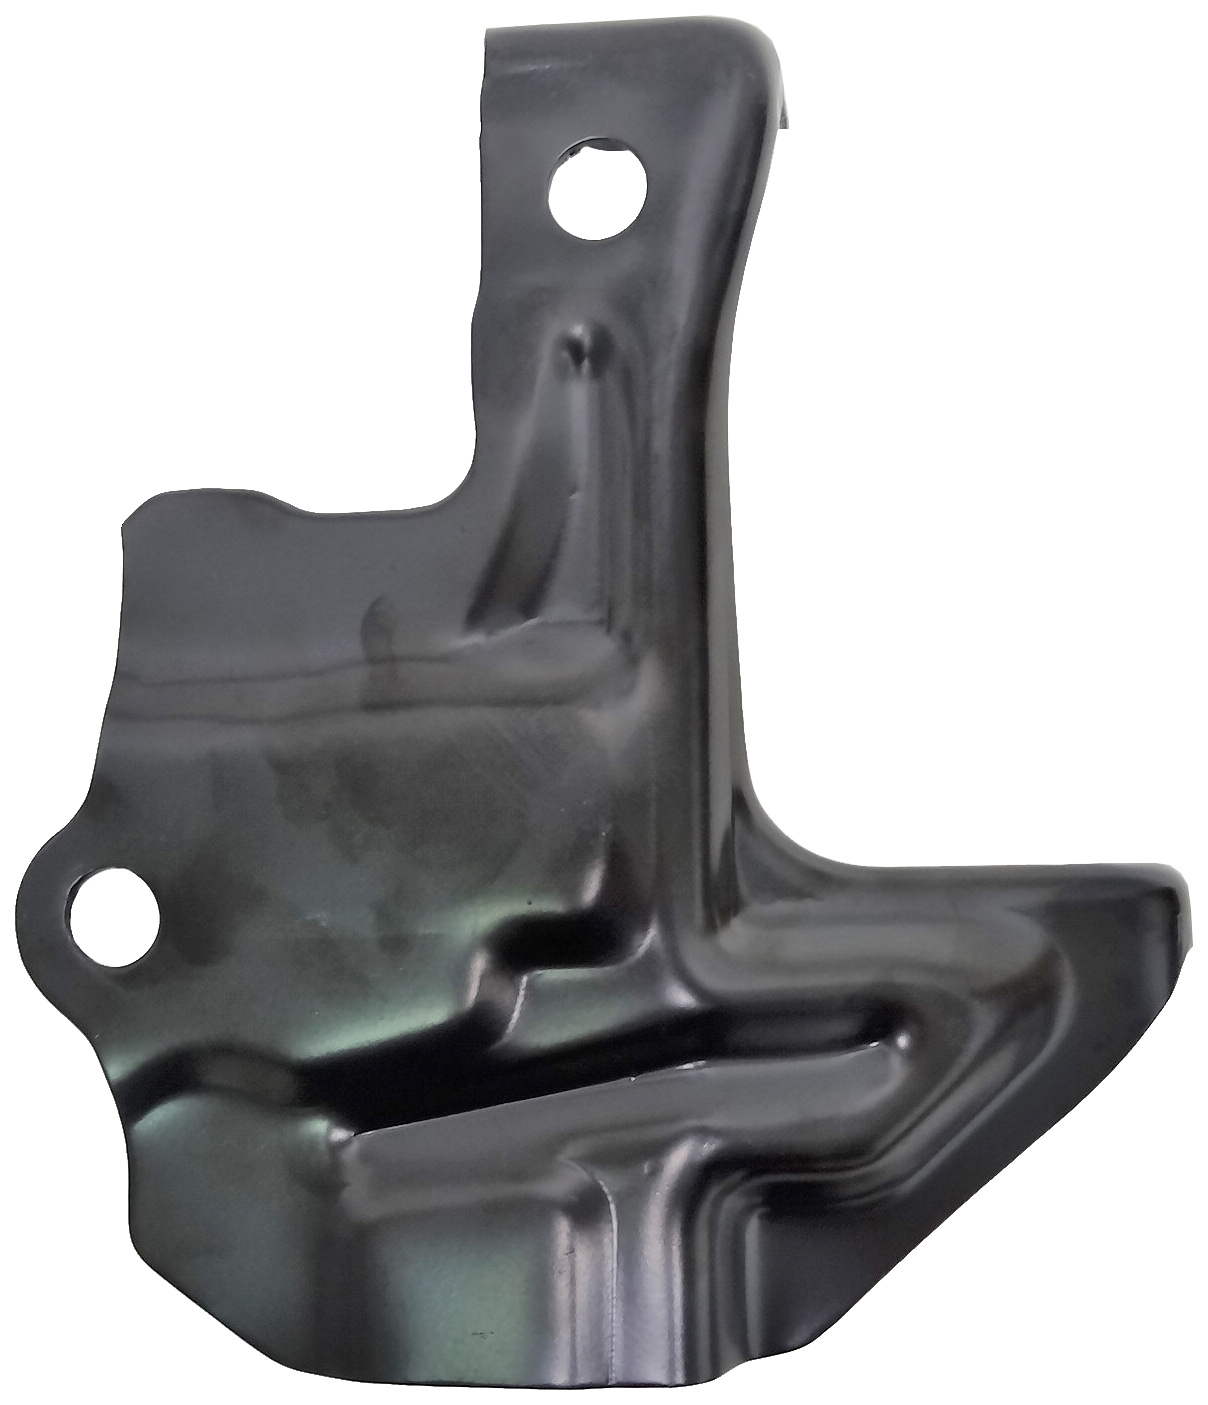 Aftermarket RADIATOR SUPPORTS for TOYOTA - CAMRY, CAMRY,18-24,Radiator support